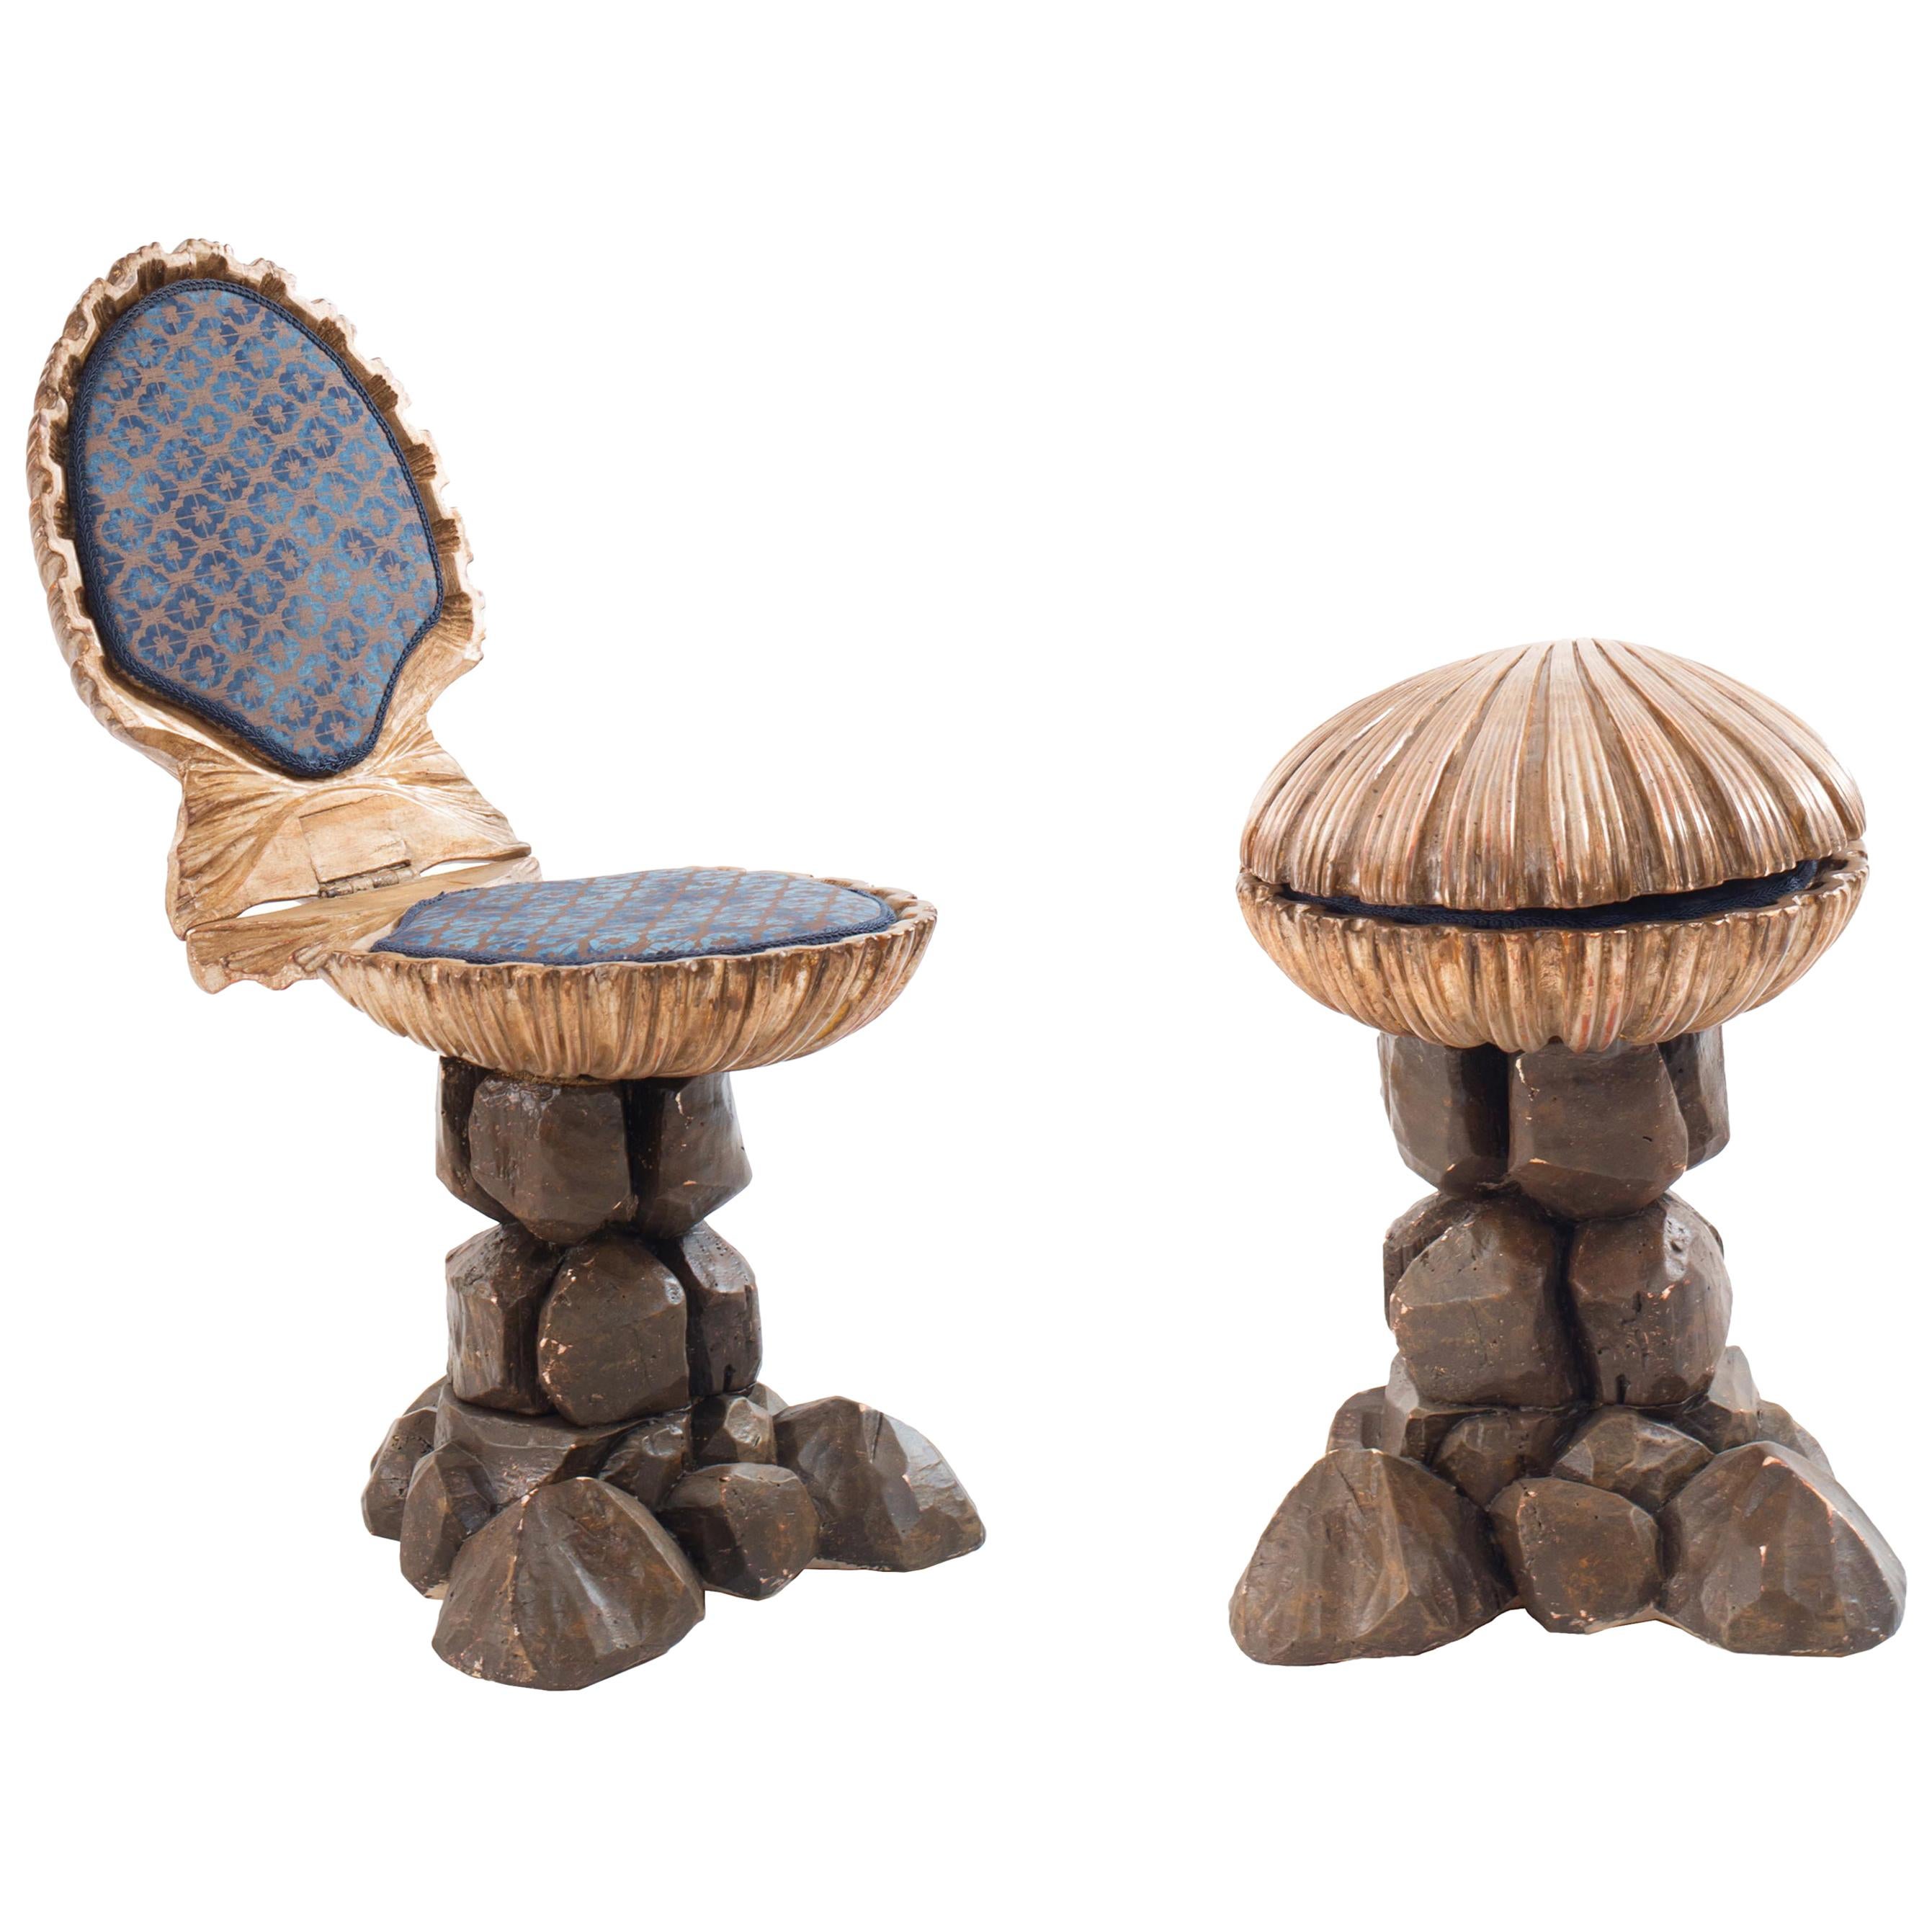 2 Italian Venetian Grotto Hinged Clam Shell Chairs For Sale At 1stdibs